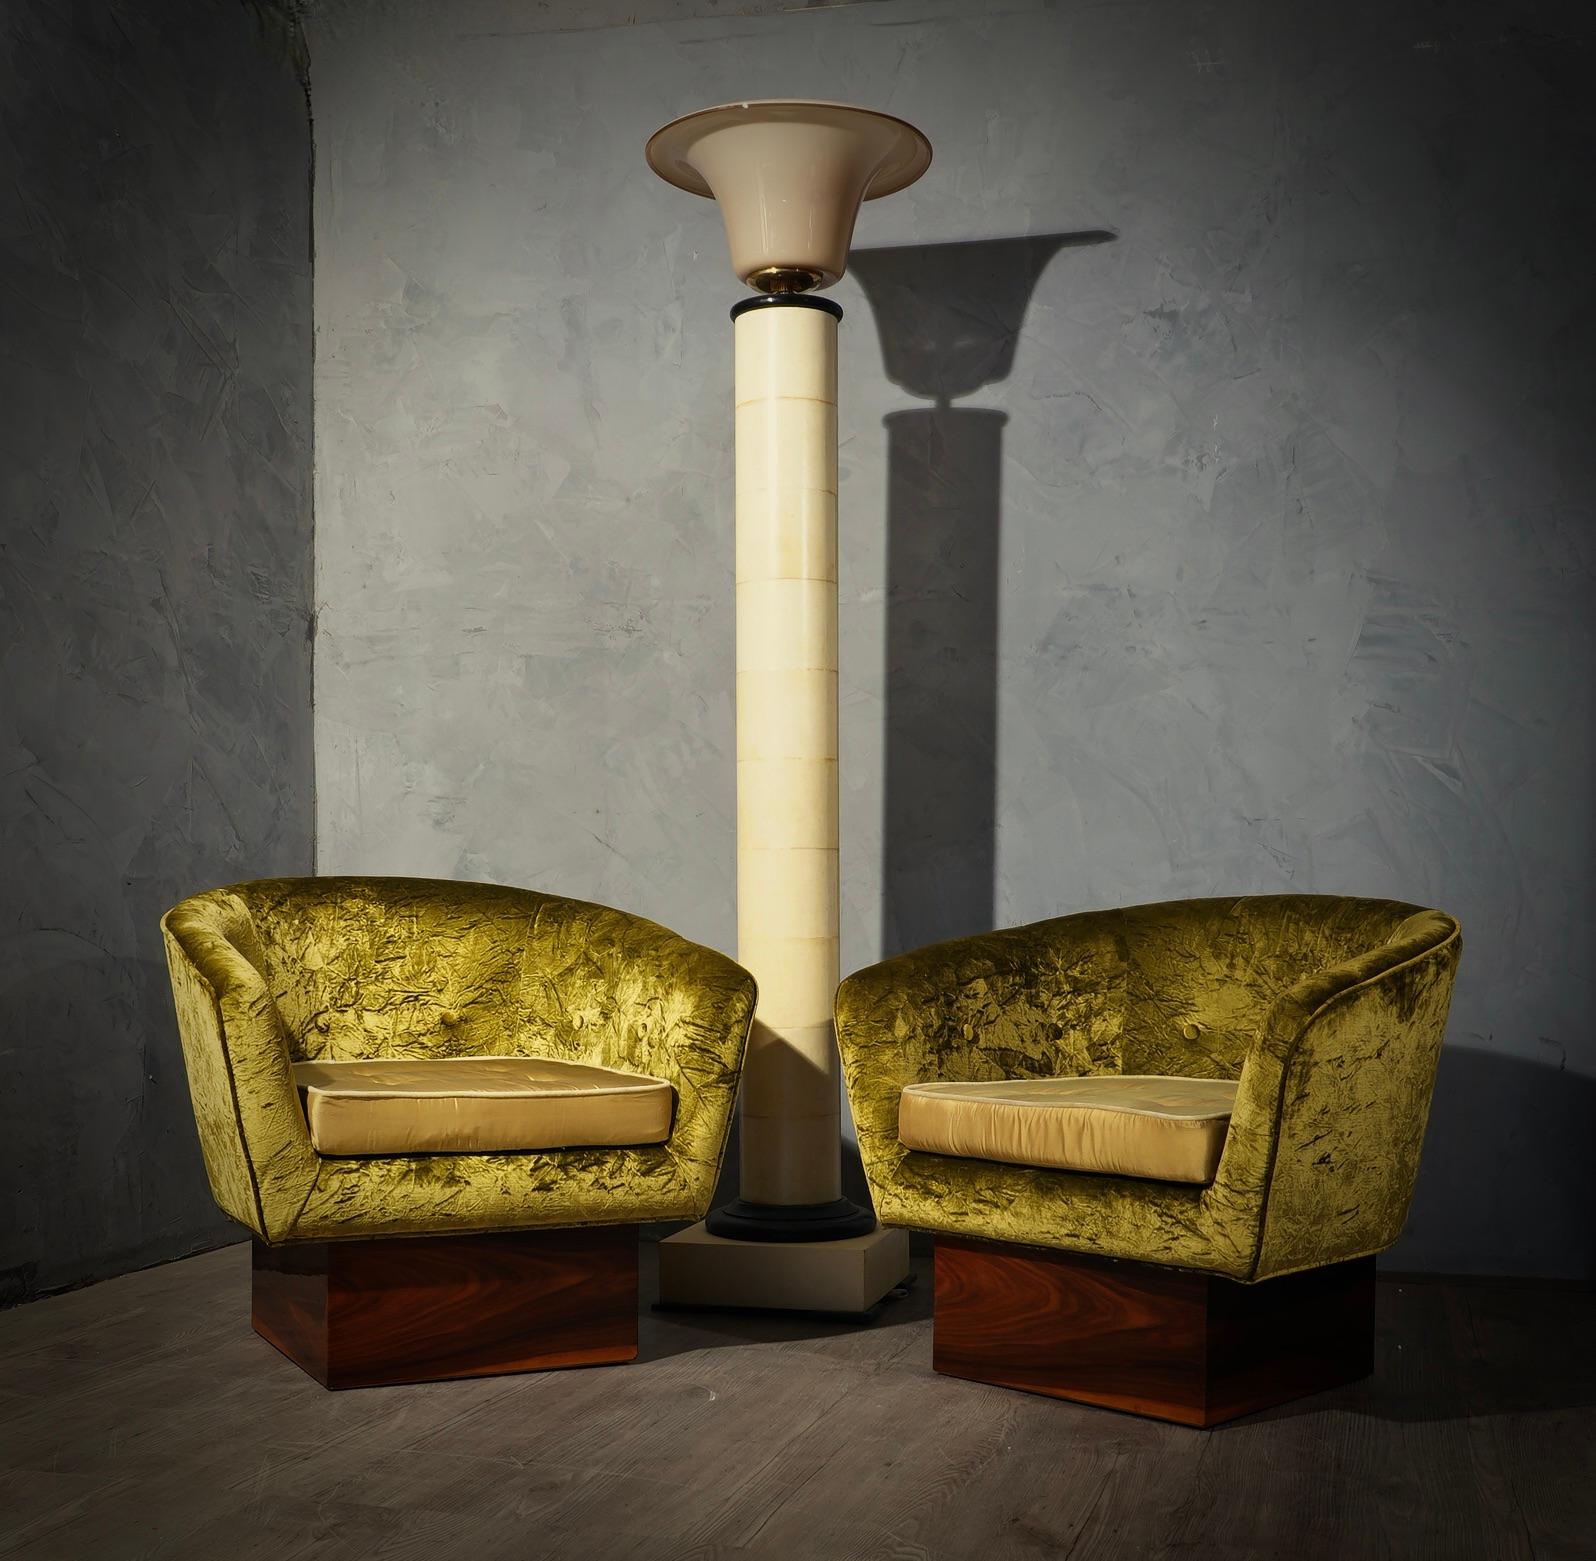 Beautiful coupled with pastel green velvet and a central walnut pedestal, for this very special Art Deco armchairs.

Armchair with base veneered of walnut wood, and seat covered in two types of velvet. The armchair is well structured in design, and